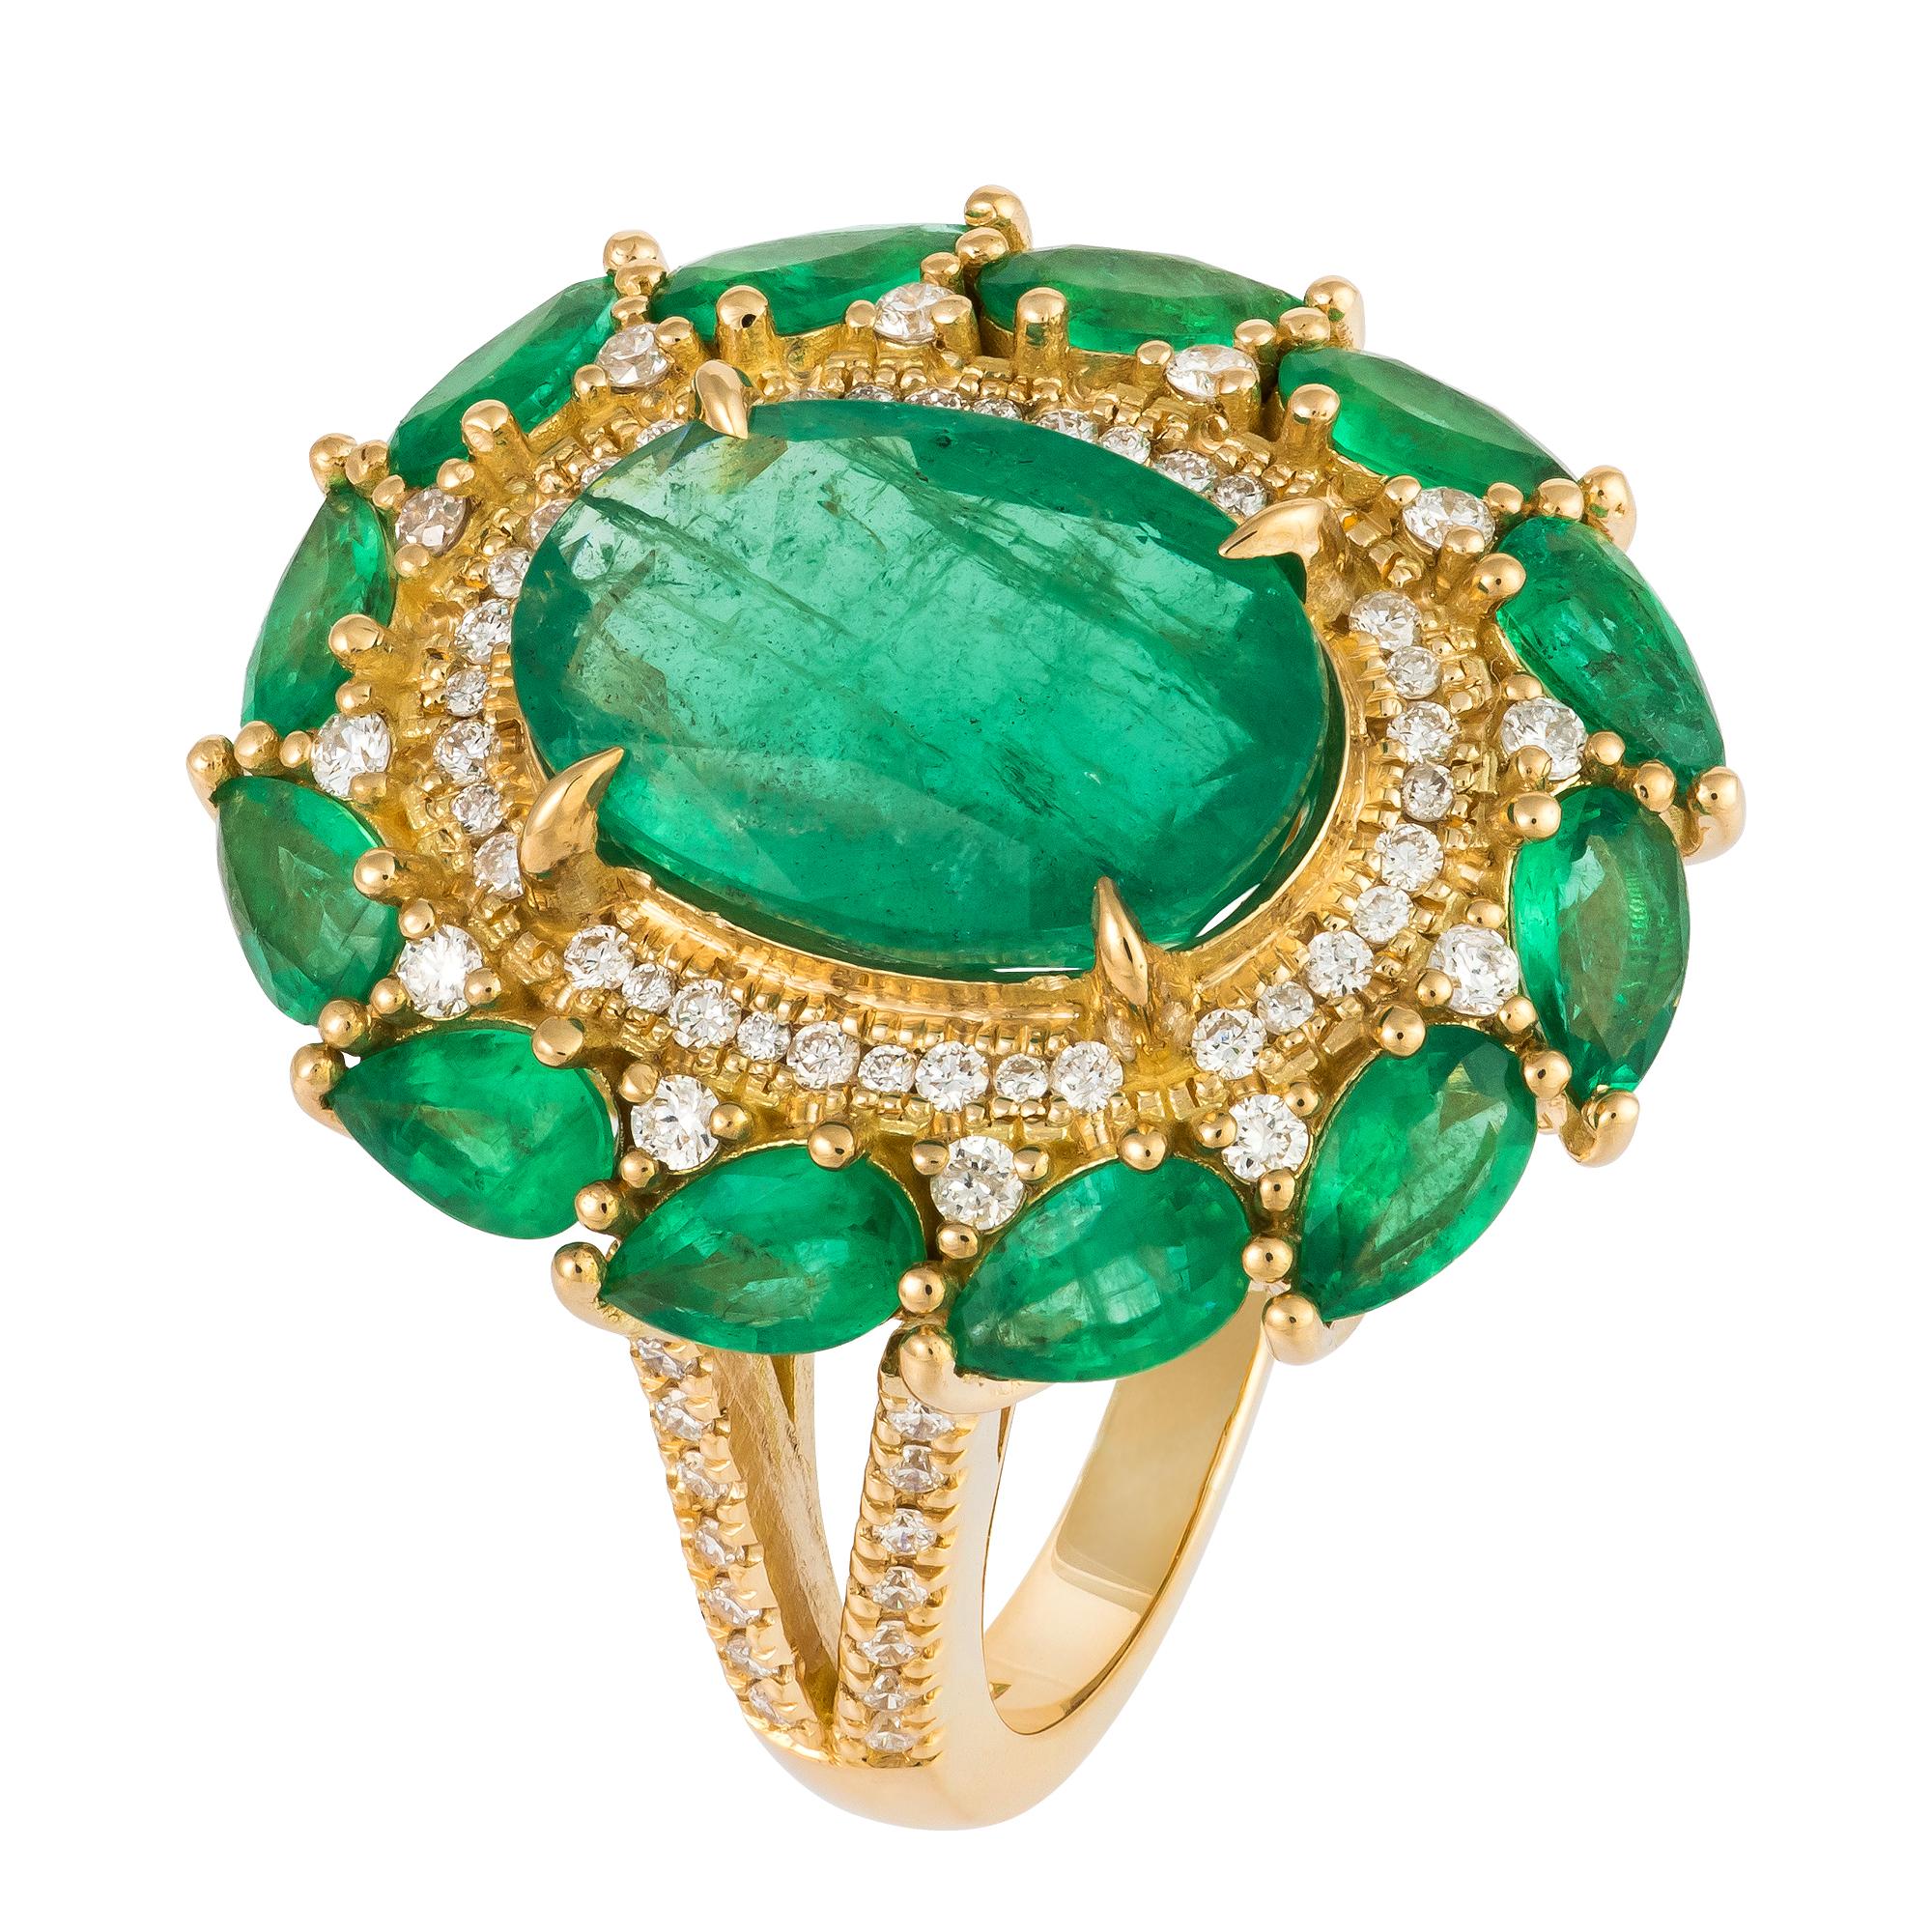 For Sale:  Impressive Yellow 18K Gold Emerald White Diamond Ring For Her 2